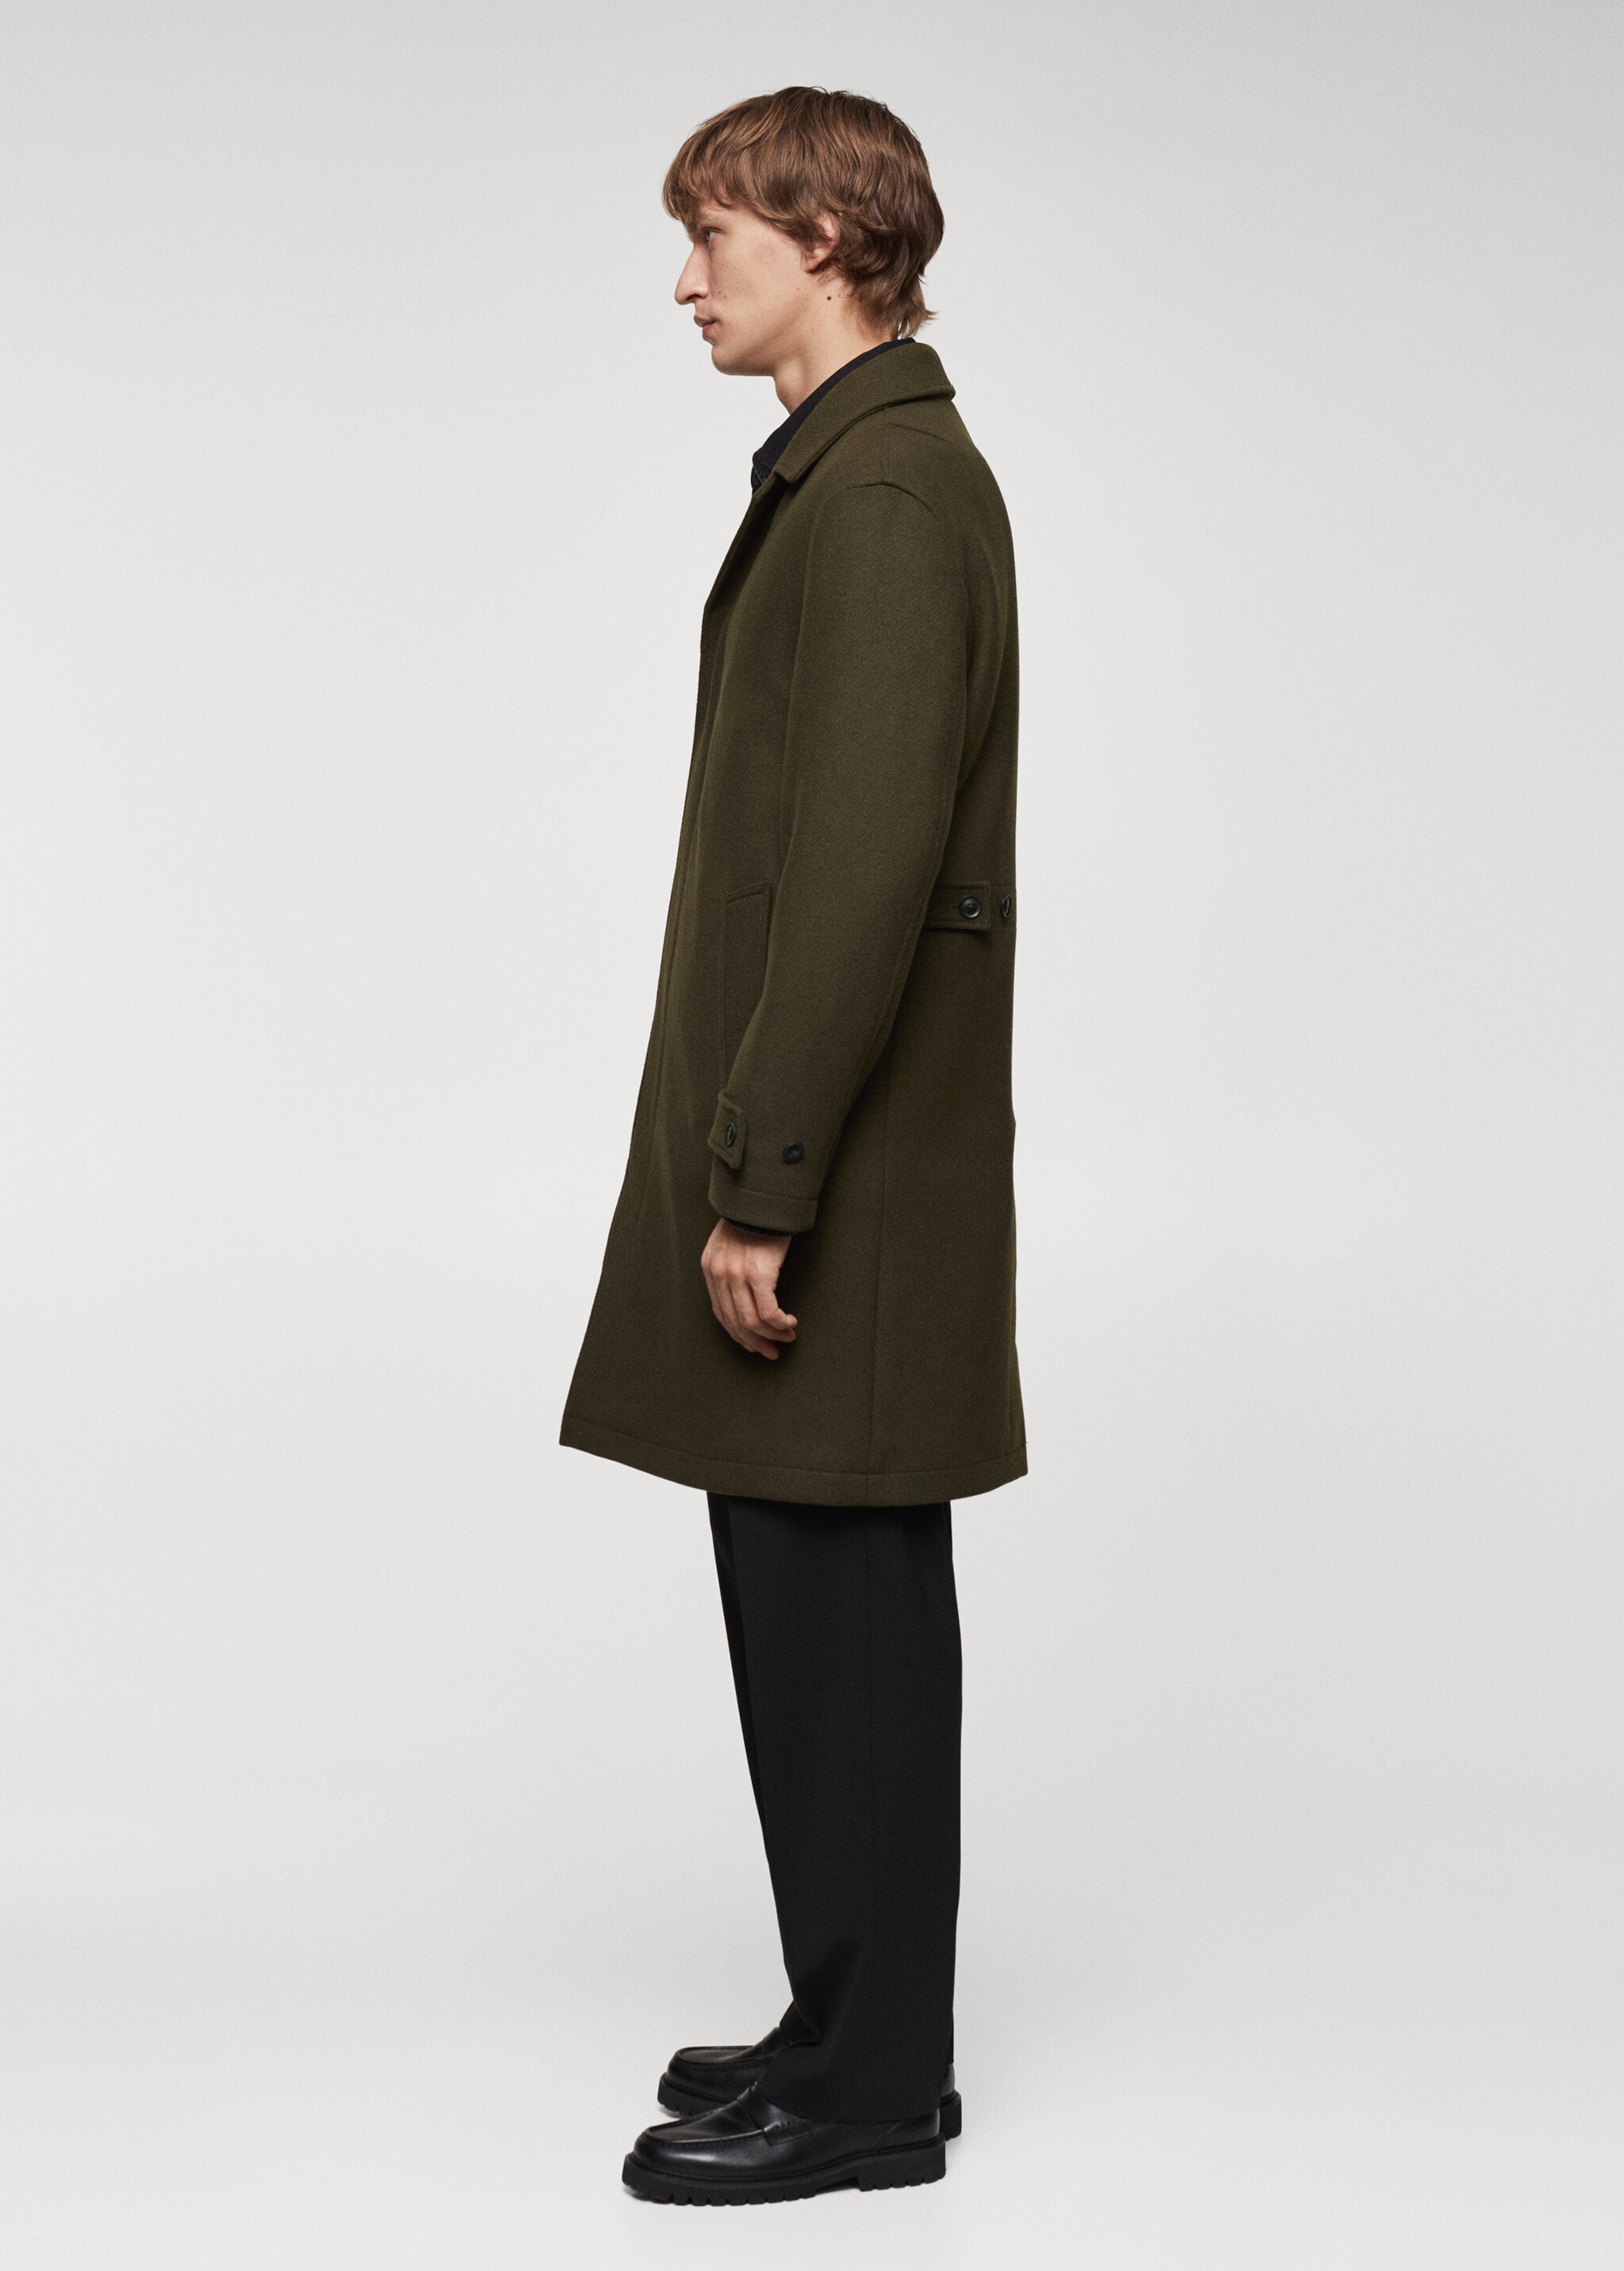  Regular fit wool coat - Details of the article 1